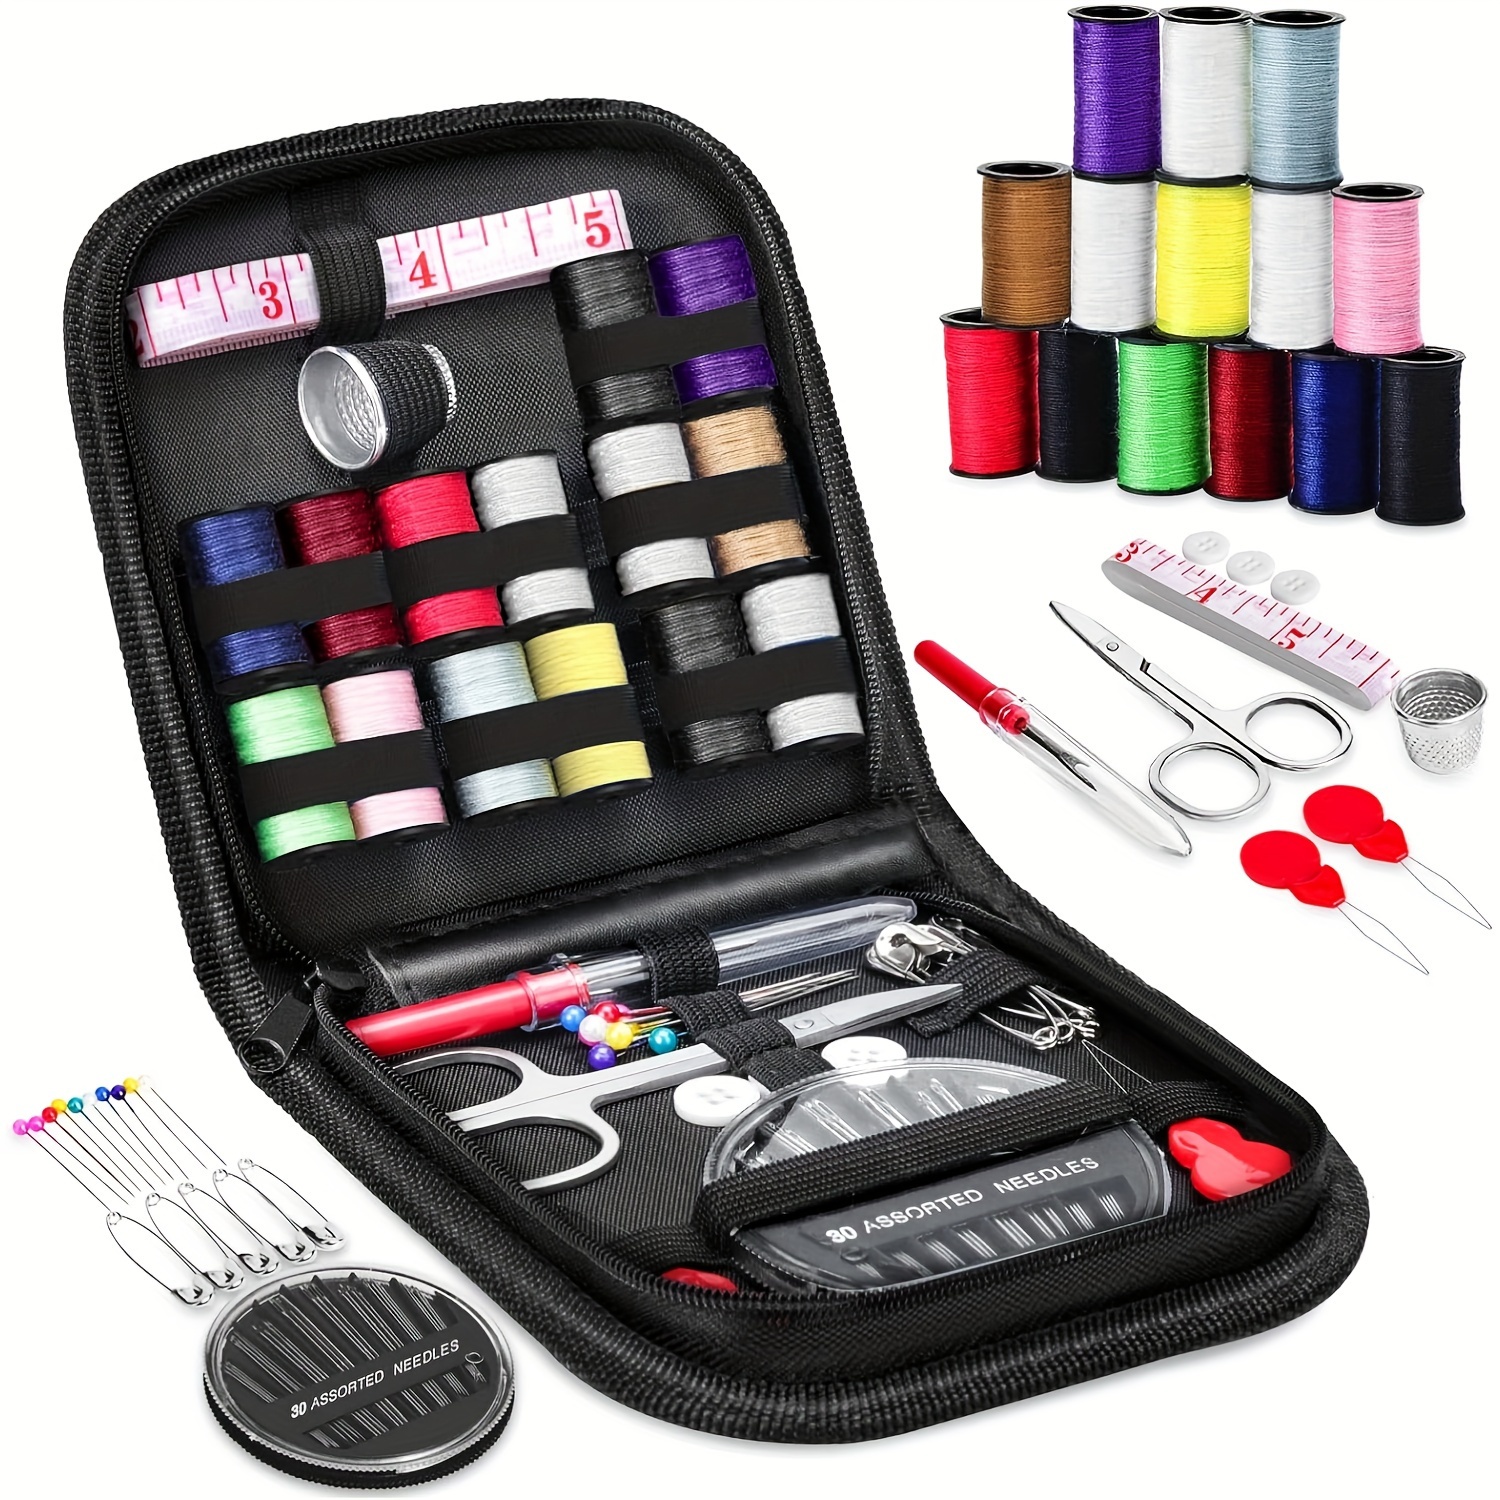 

Portable Black Sewing Kit For Home, Beginners, Travel, Diy Sewing - Complete With Needles, Scissors, Threads, Measuring Tape & More - Ideal Emergency Sewing Repair Kit & Gift Set